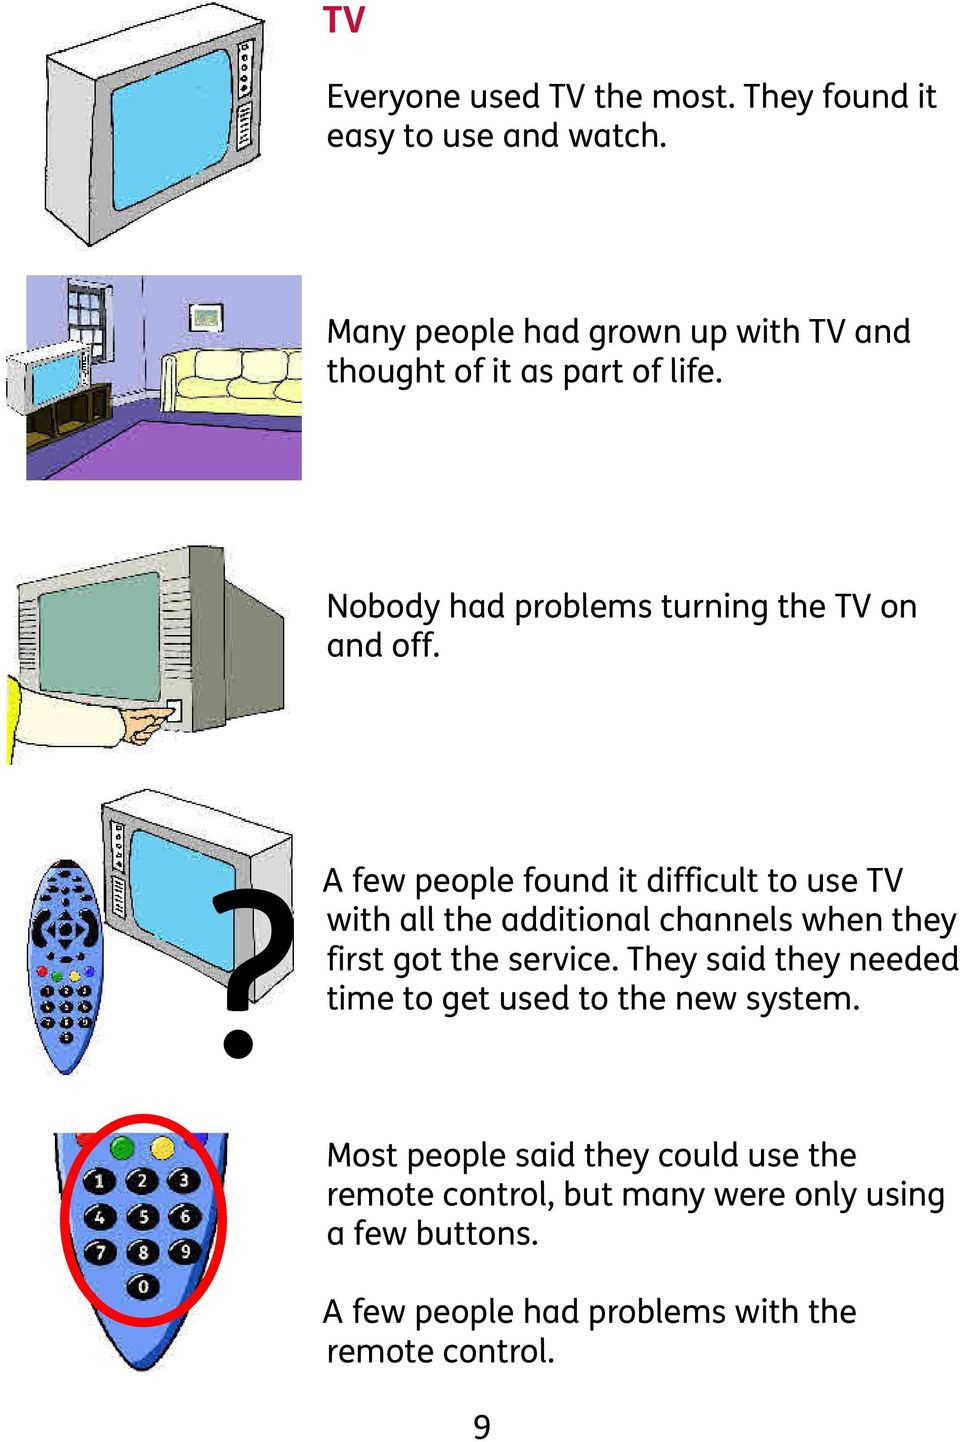 ? A few people found it difficult to use TV with all the additional channels when they first got the service.